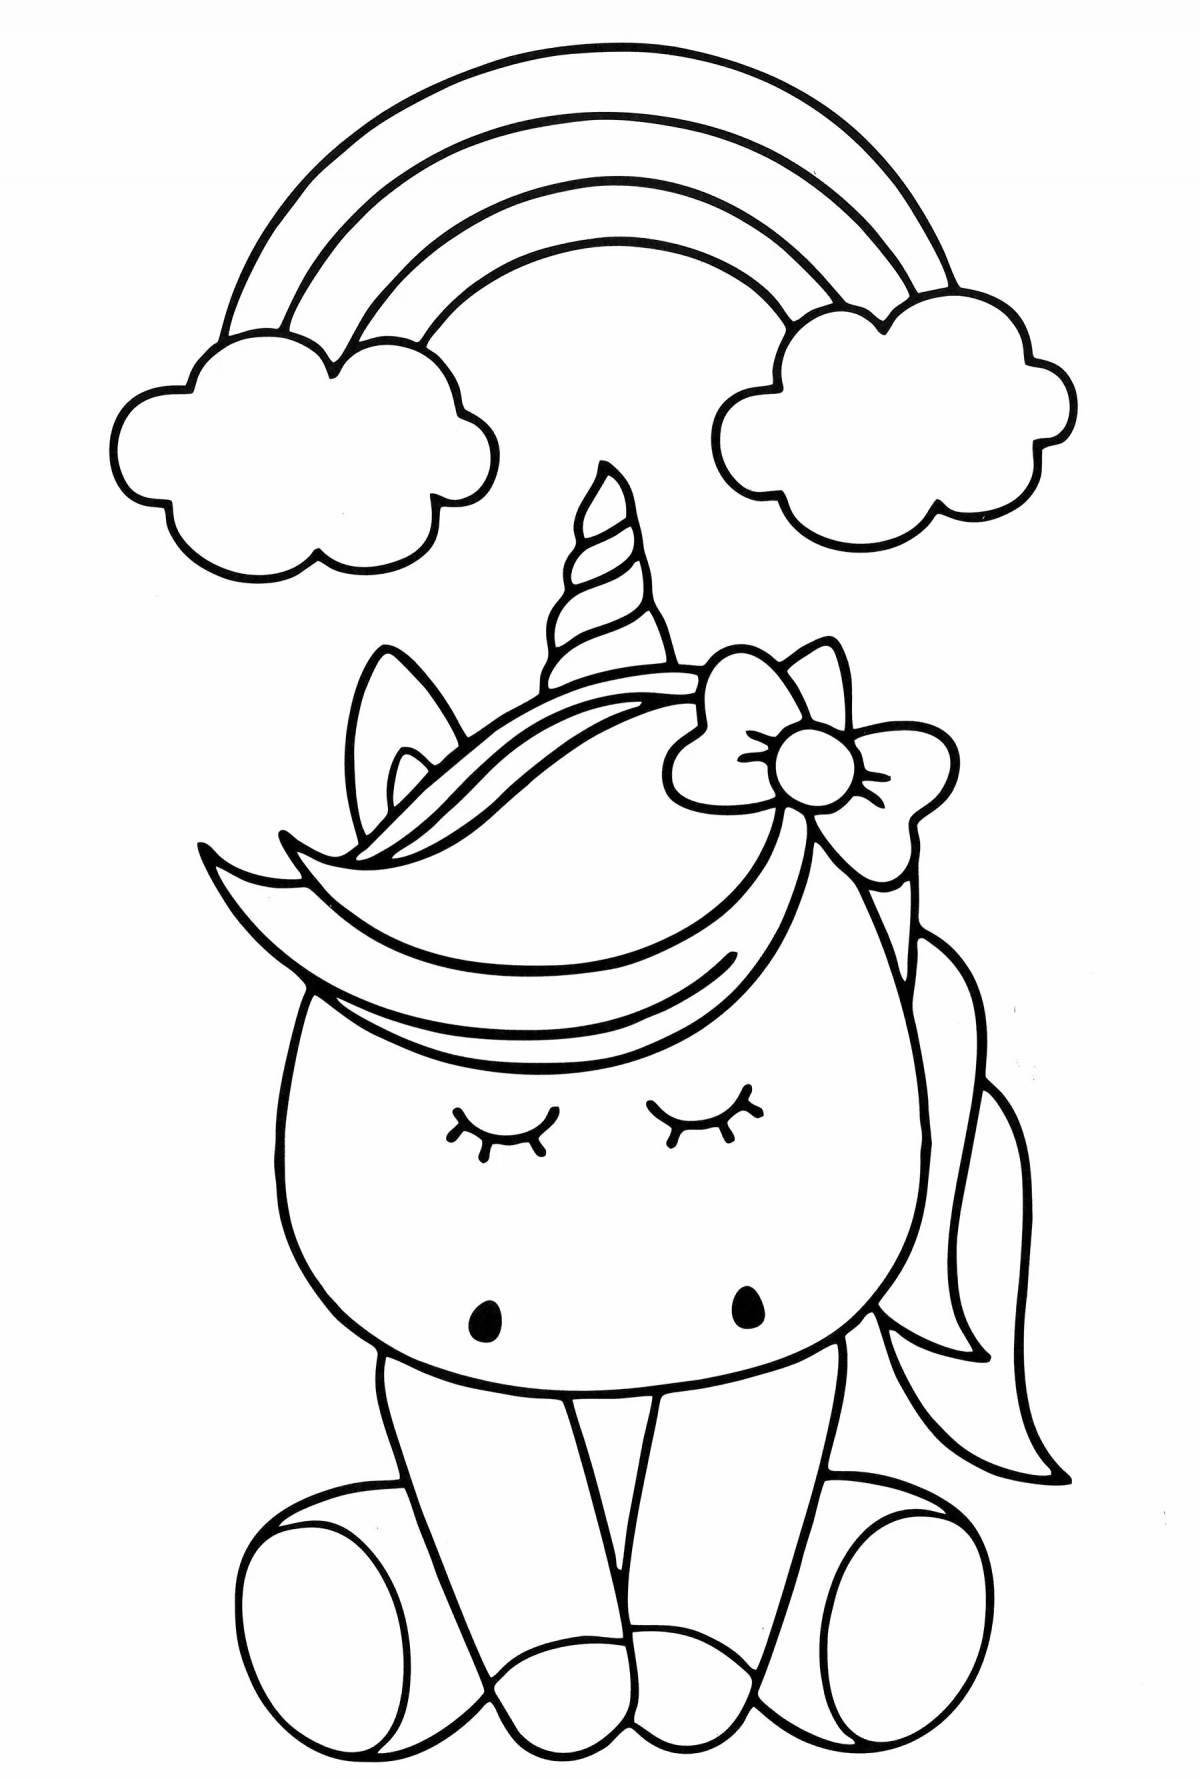 Coloring book fluffy unicorn for kids